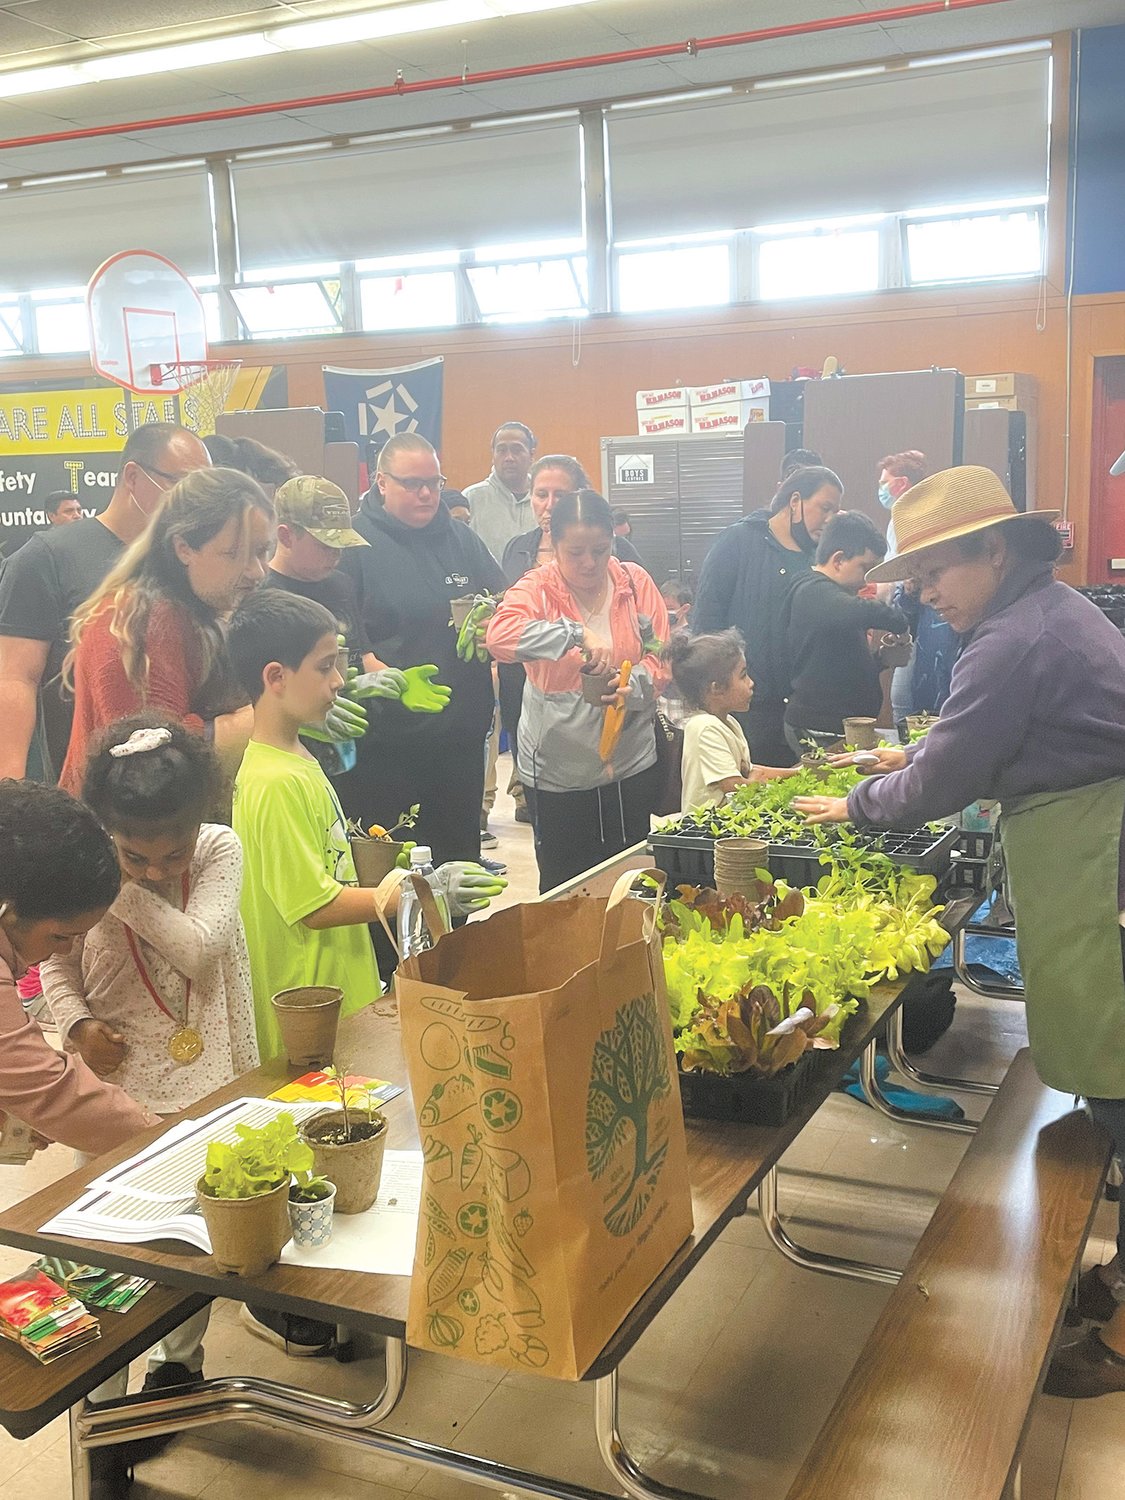 ARLINGTON ELEMENTARY, HOW DOES YOUR GARDEN GROW: With lots of help from community partners and Mother Nature. (Photo Courtesy of Stephanie Simone)